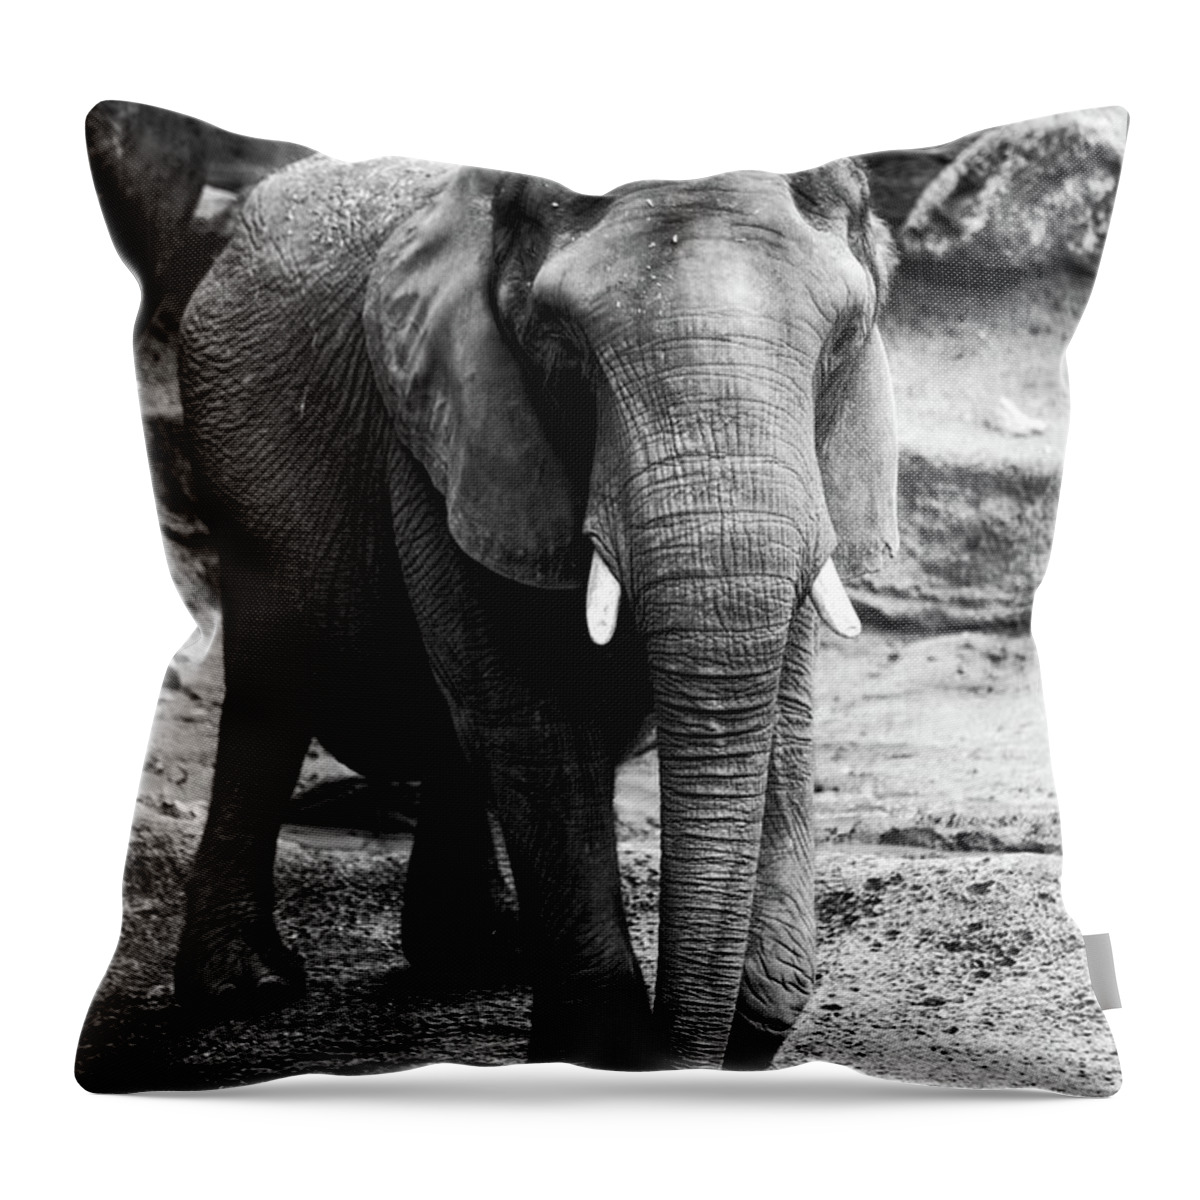 Elephant Throw Pillow featuring the photograph Gentle One by Karol Livote